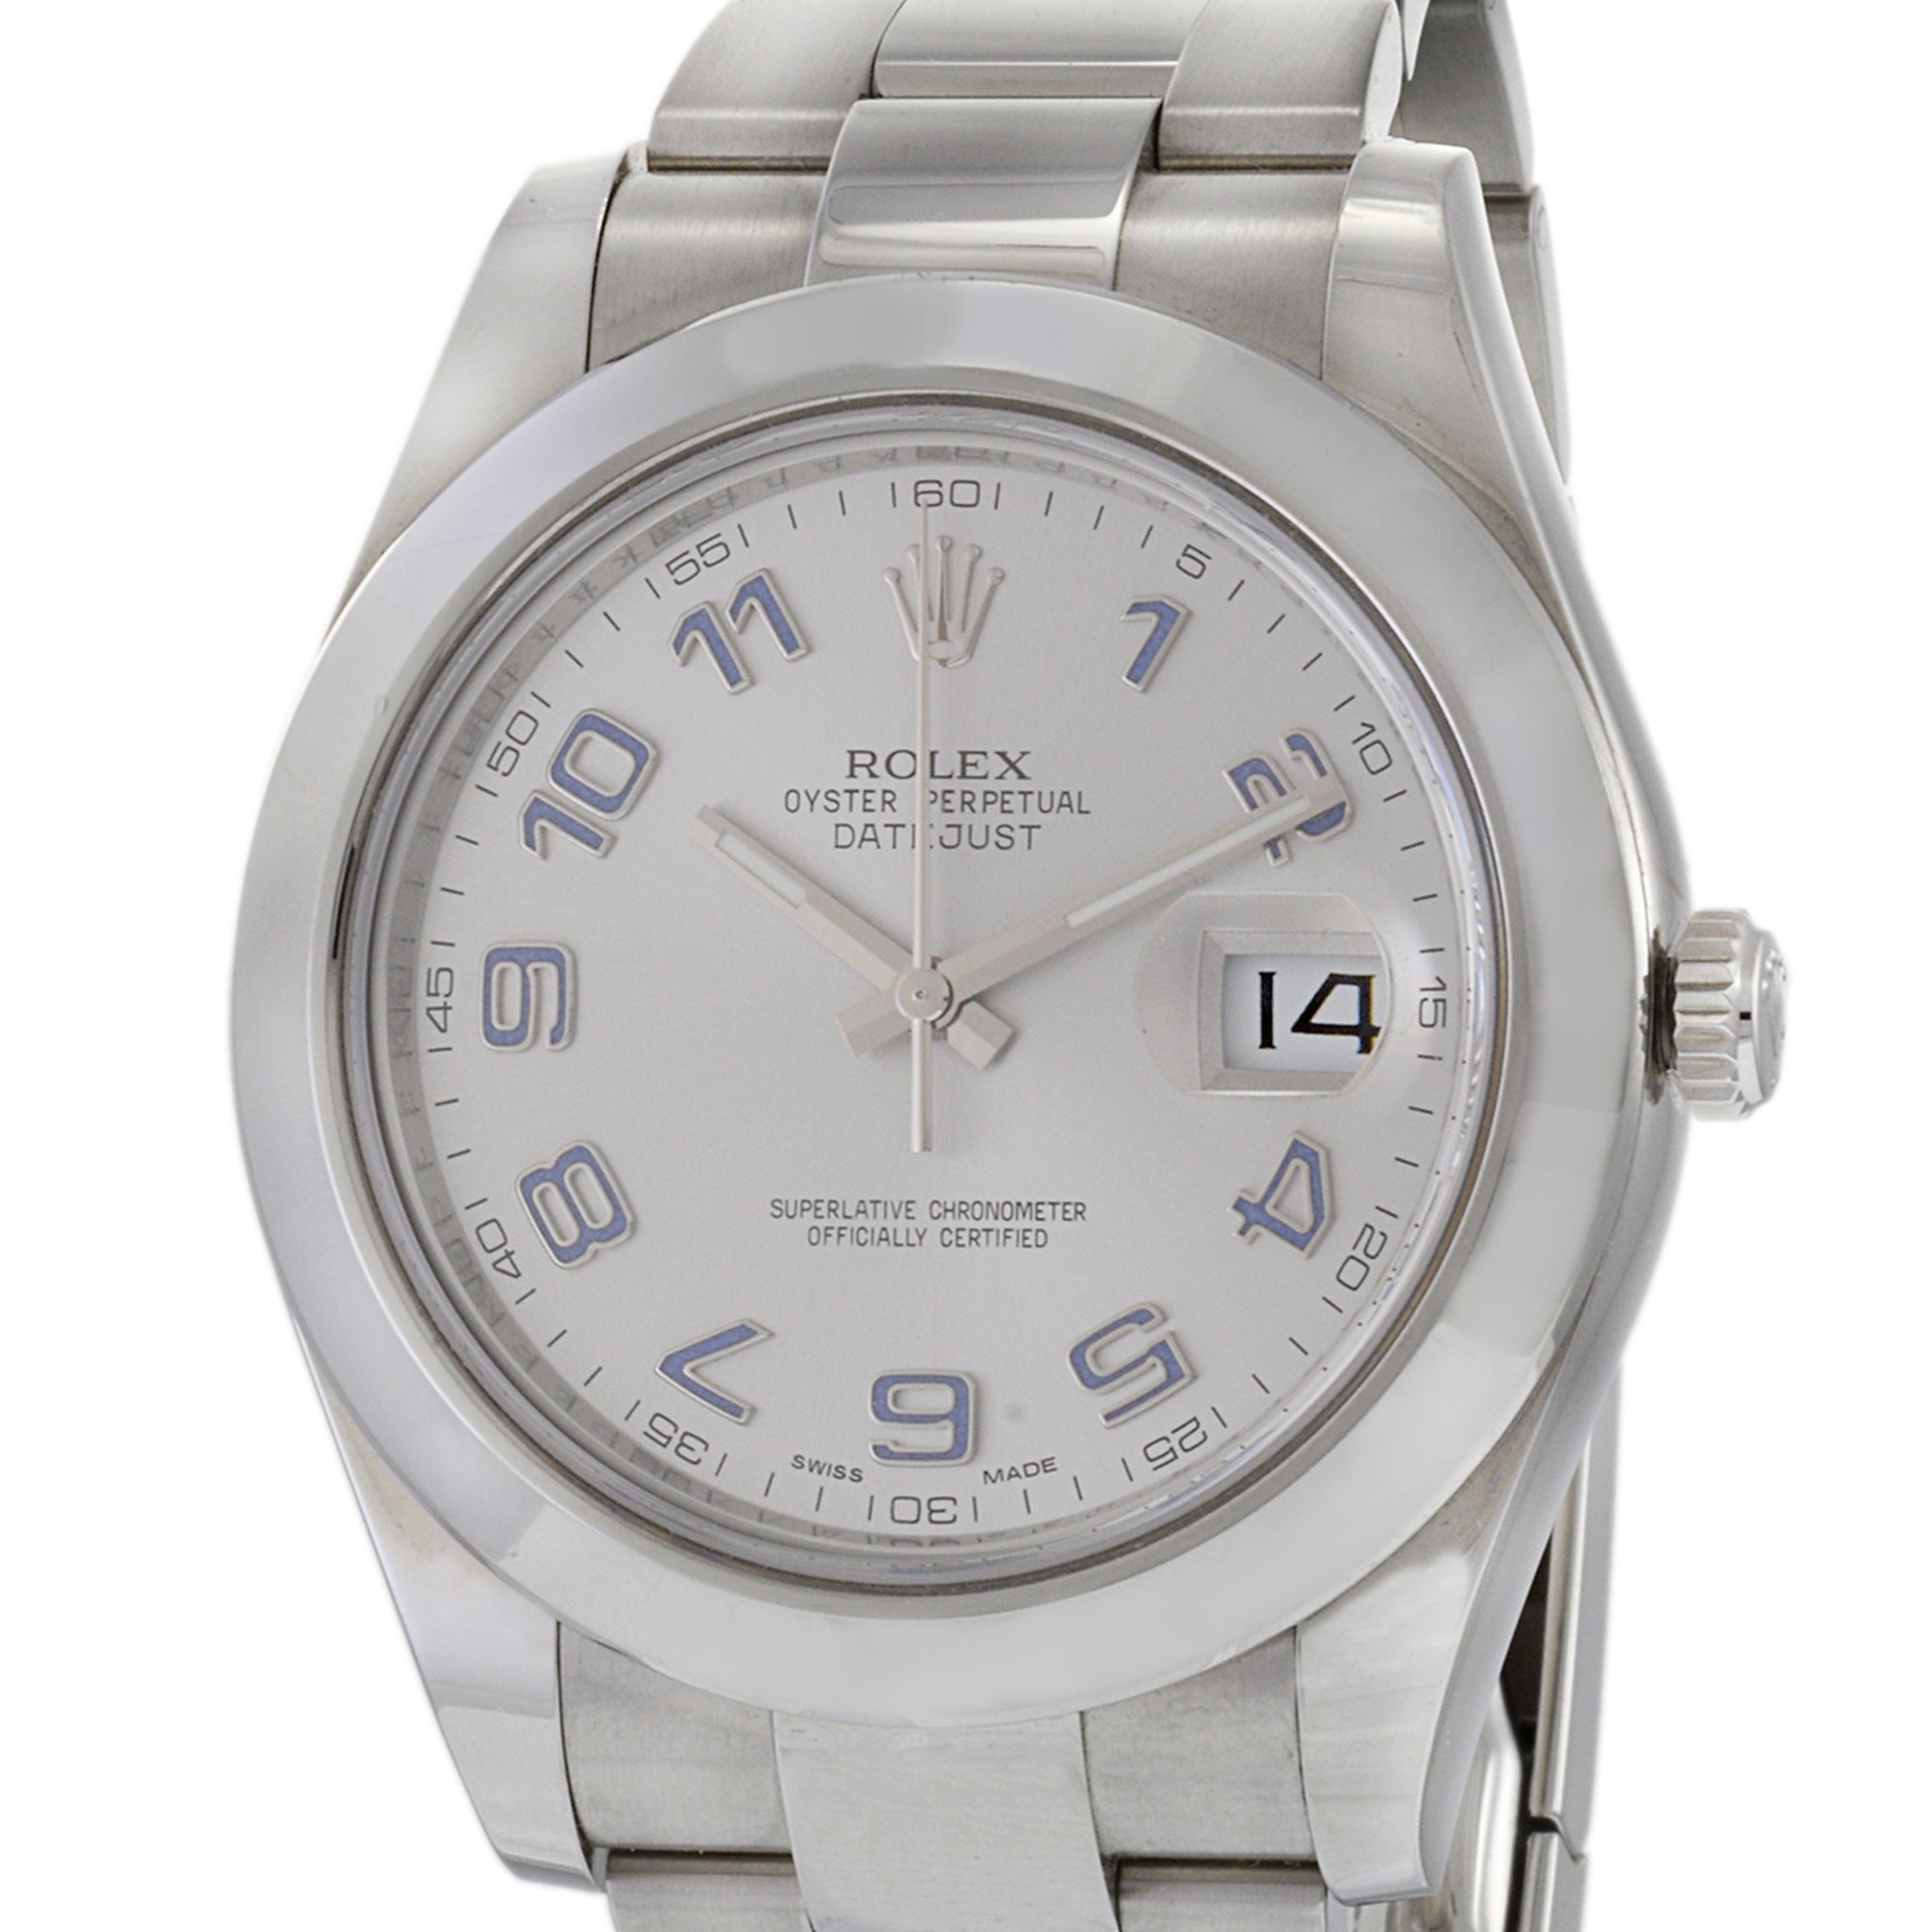 Rolex Datejust 41 Reference 116300 Stainless Steel Smooth Bezel